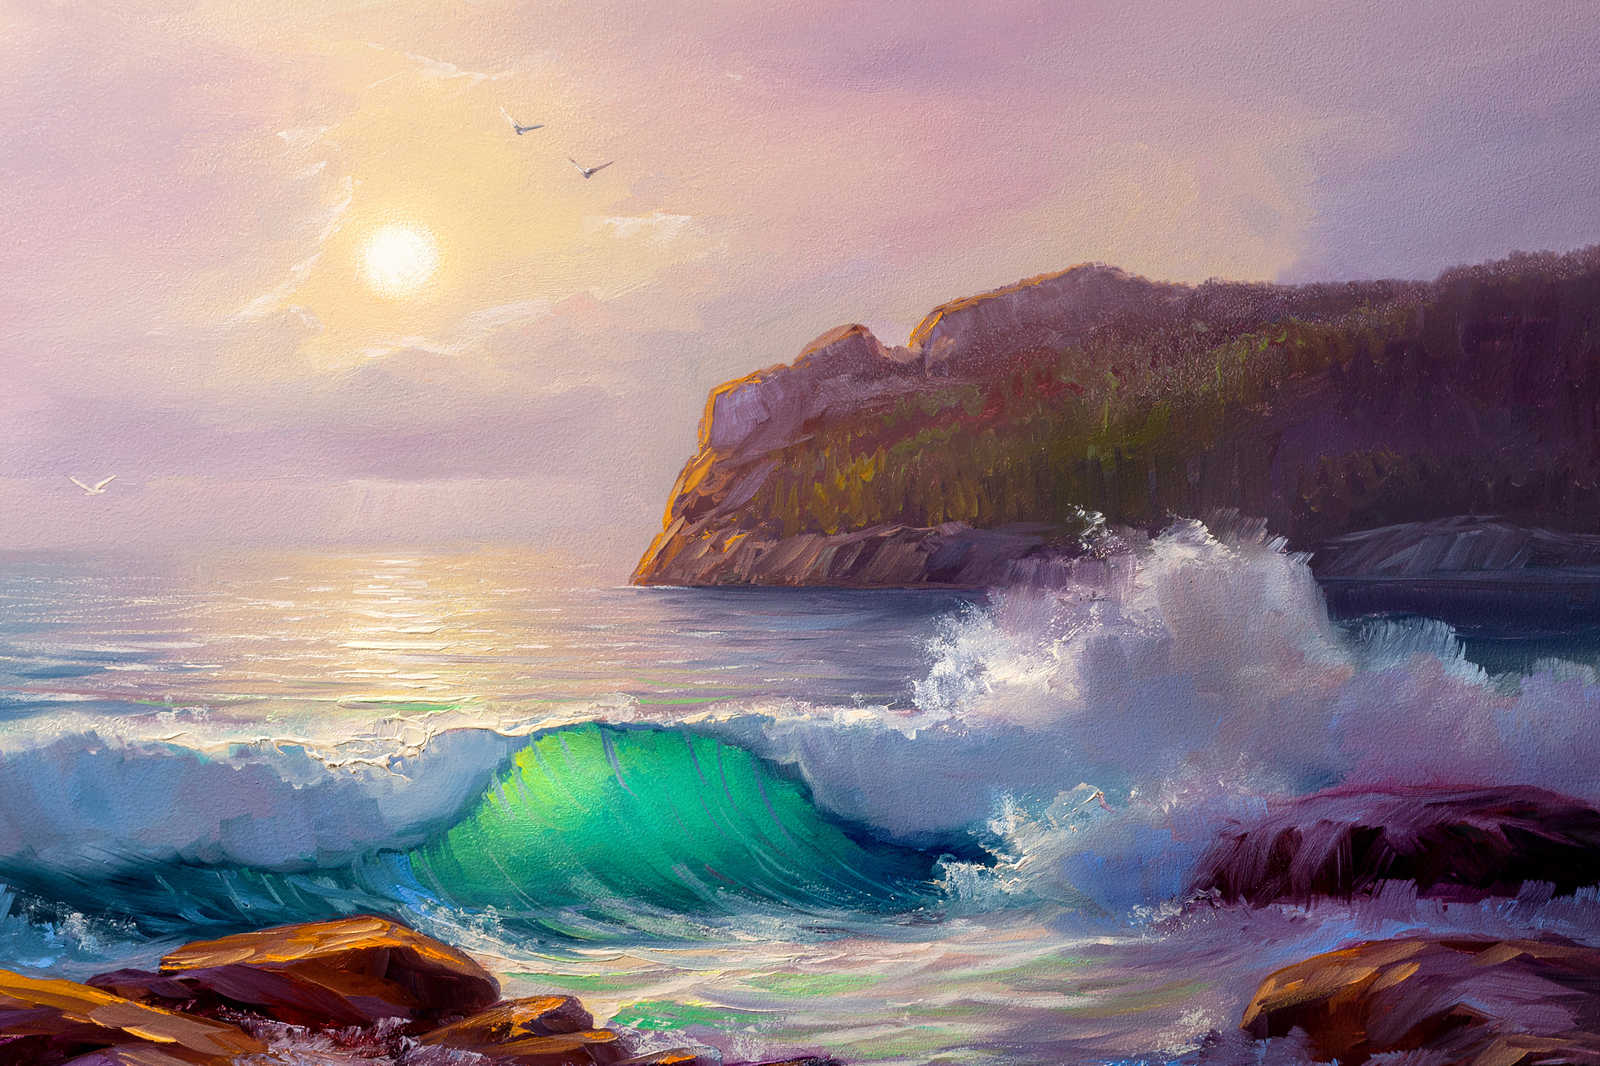             Canvas painting Painting of a Coast at Sunrise - 0.90 m x 0.60 m
        